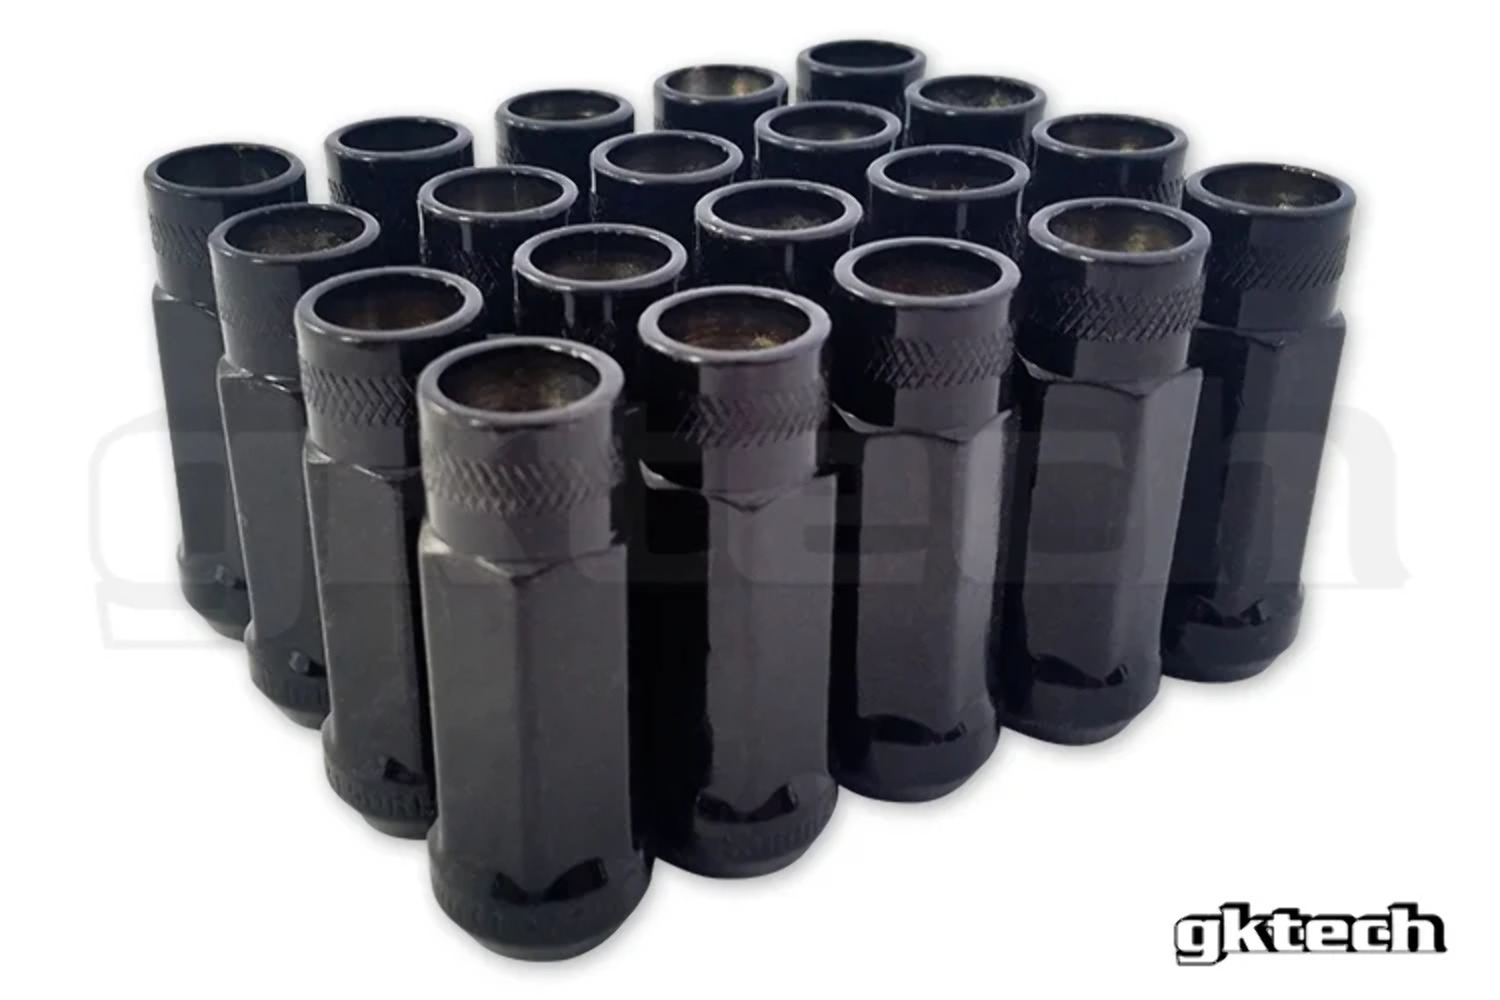 GKTECH M12x1.5 Steel tuner lug nuts - Pack of 20 - Black